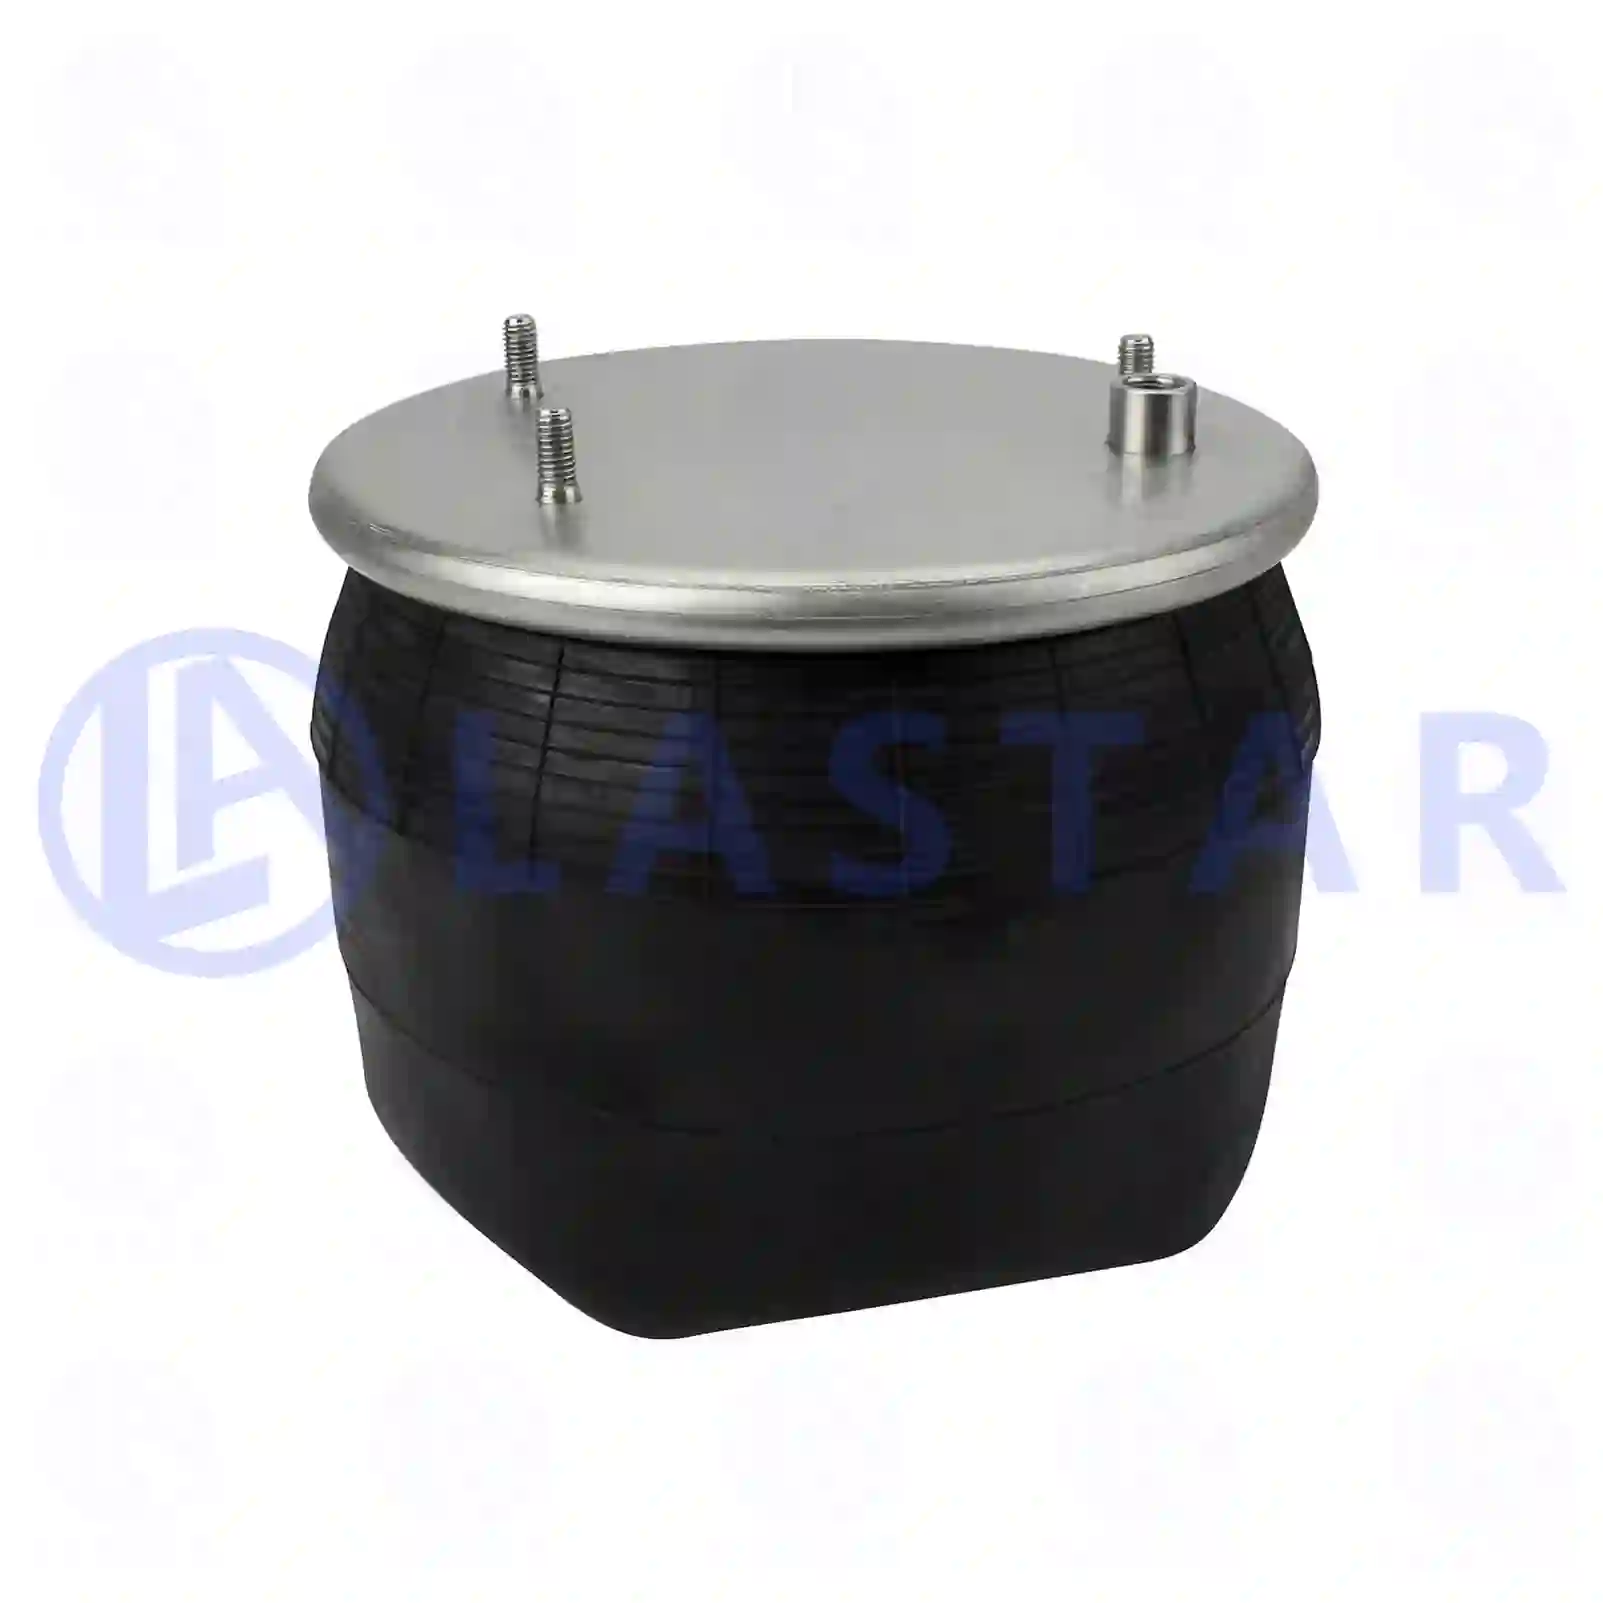 Air spring, without piston, 77728505, 0067504, 67504, MLF7017, ZG40833-0008 ||  77728505 Lastar Spare Part | Truck Spare Parts, Auotomotive Spare Parts Air spring, without piston, 77728505, 0067504, 67504, MLF7017, ZG40833-0008 ||  77728505 Lastar Spare Part | Truck Spare Parts, Auotomotive Spare Parts